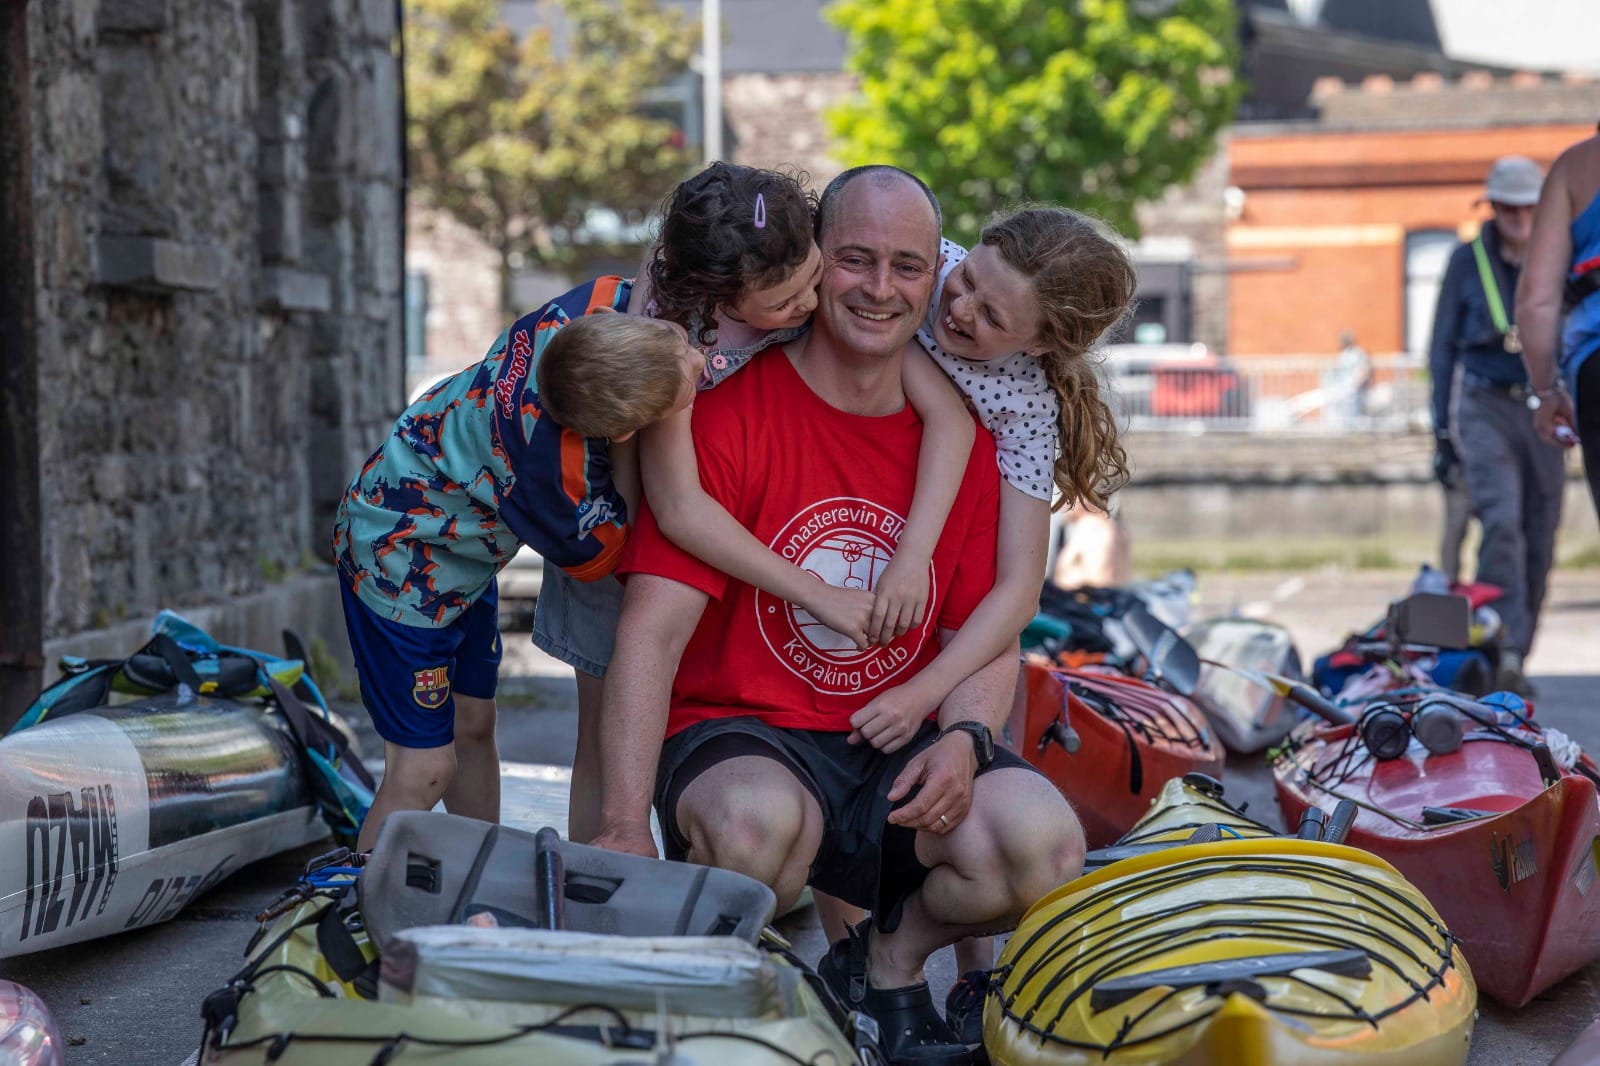 An emotional man in red T-shirt is crouched down surrounded by canoes with 3 children all hugging him and smiling.